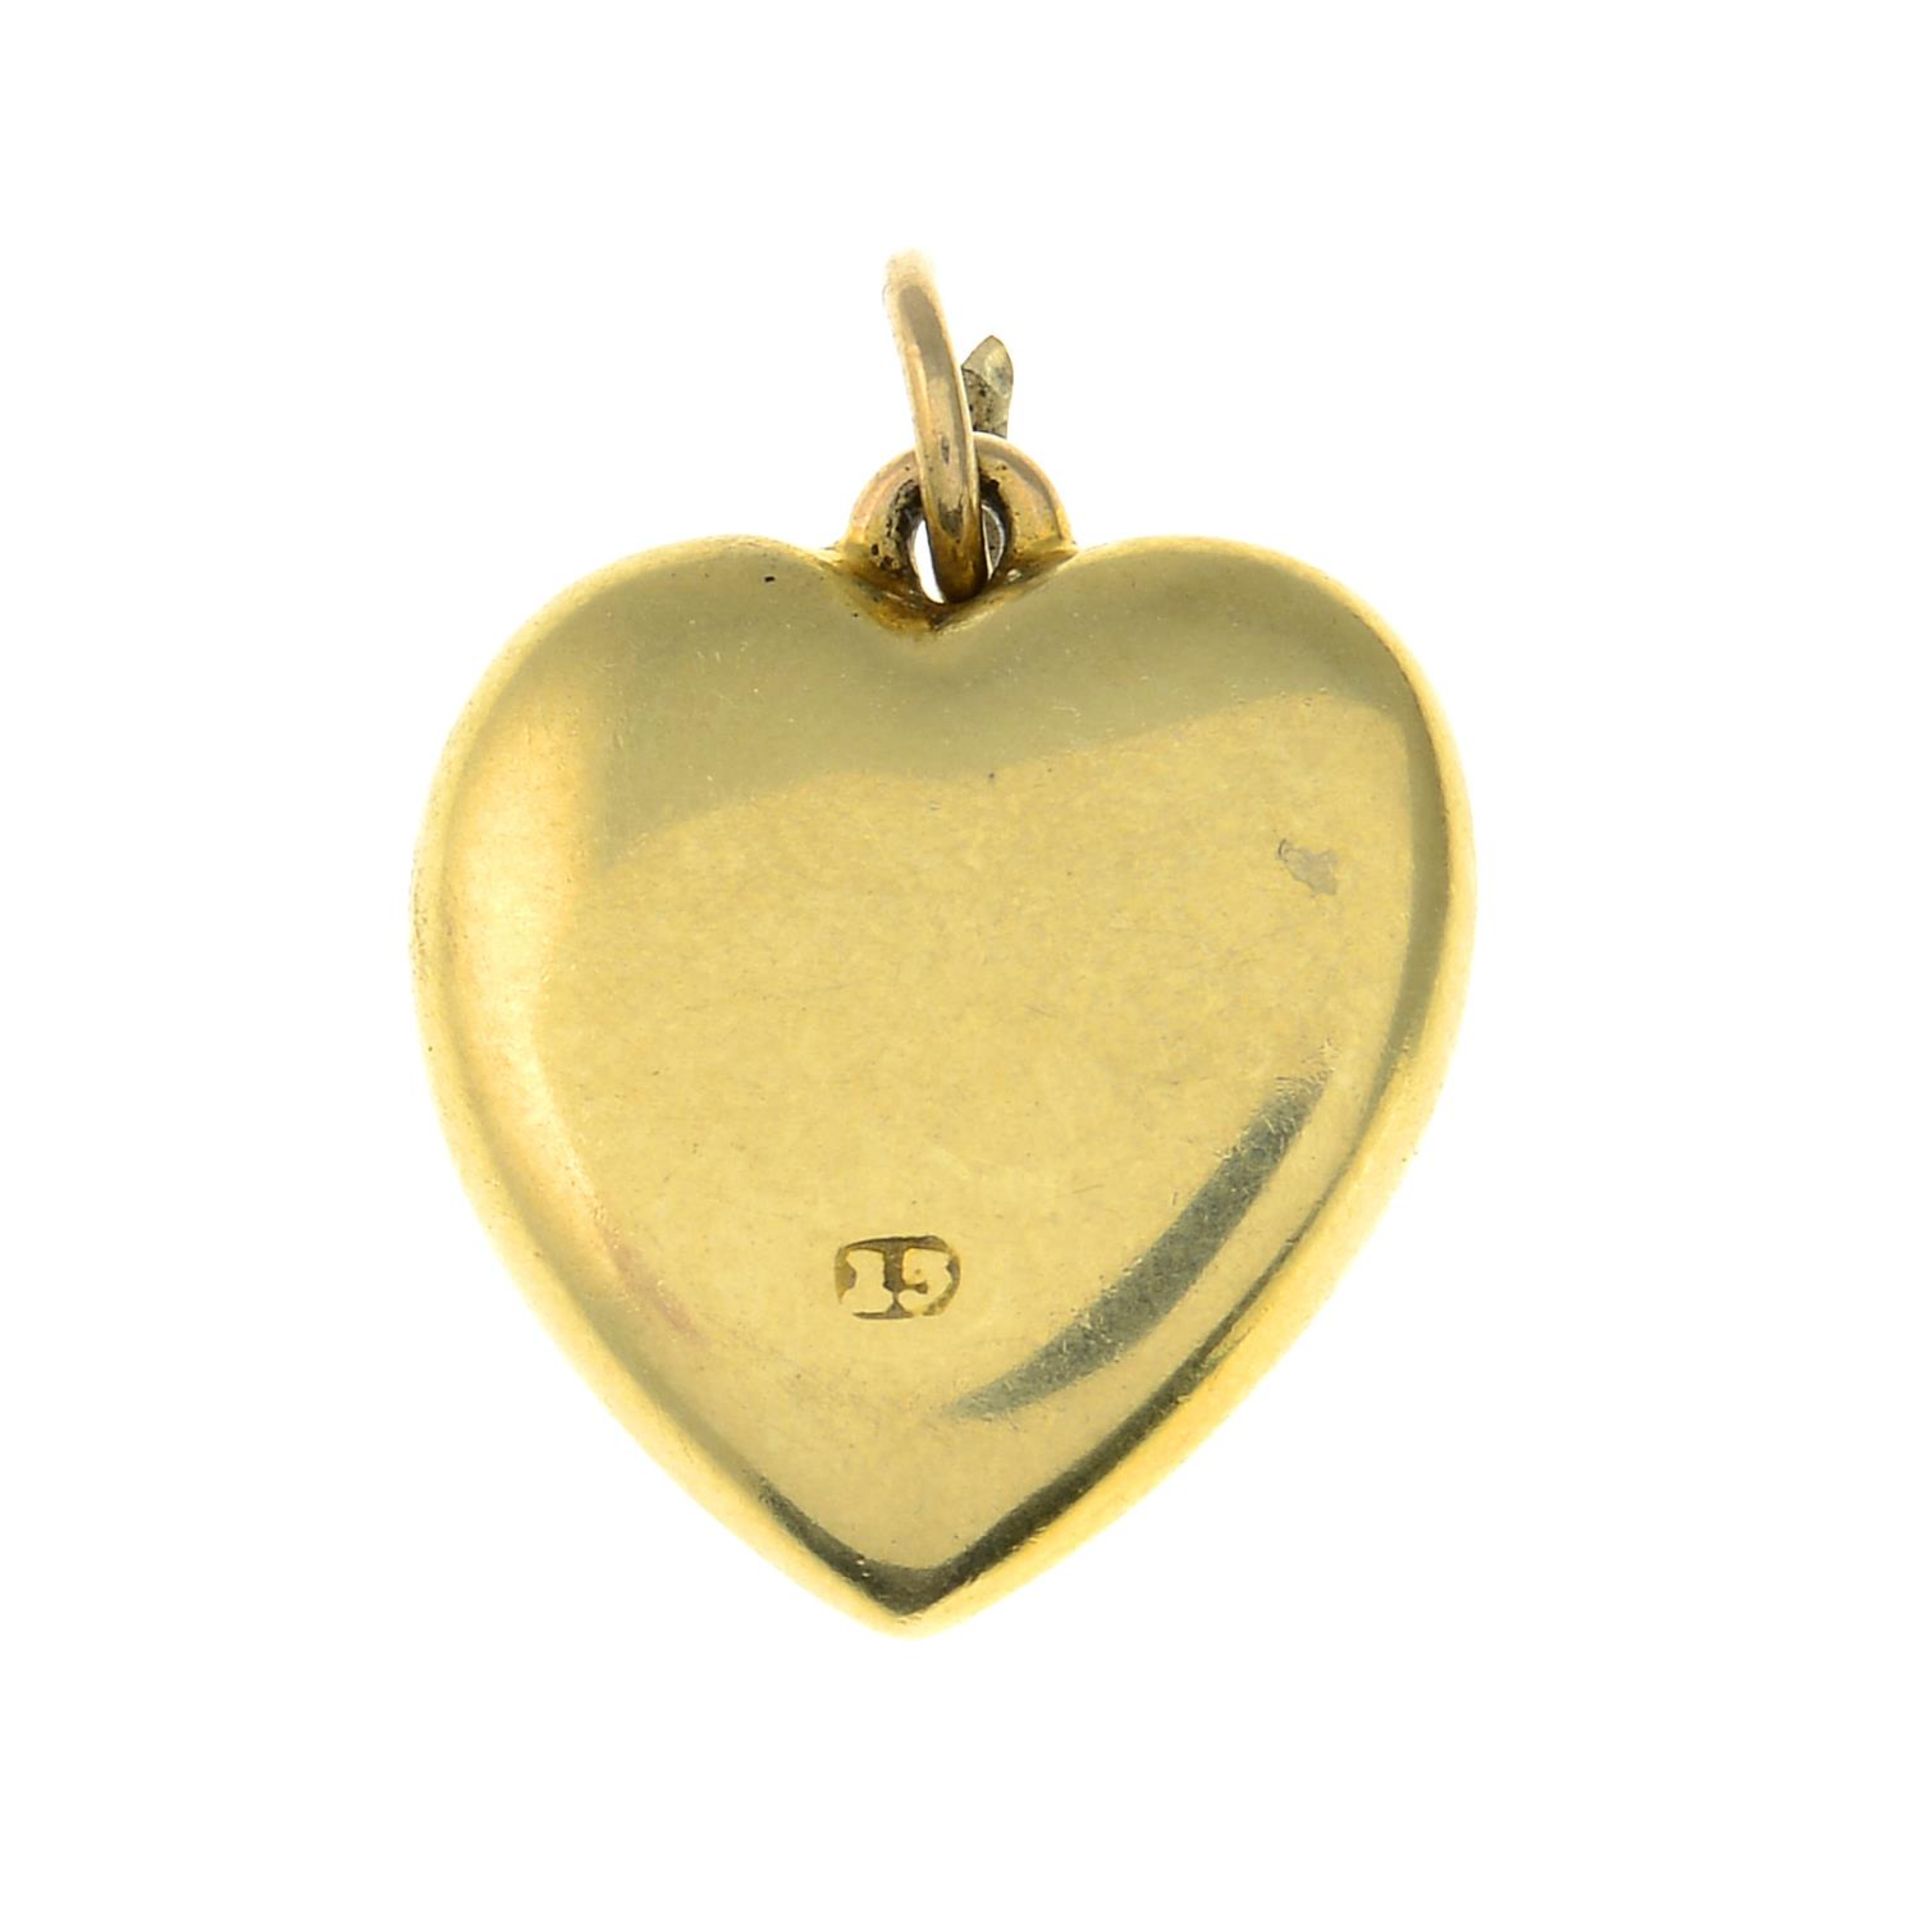 An early 20th century split pearl heart pendant.Stamped 15. - Image 2 of 2